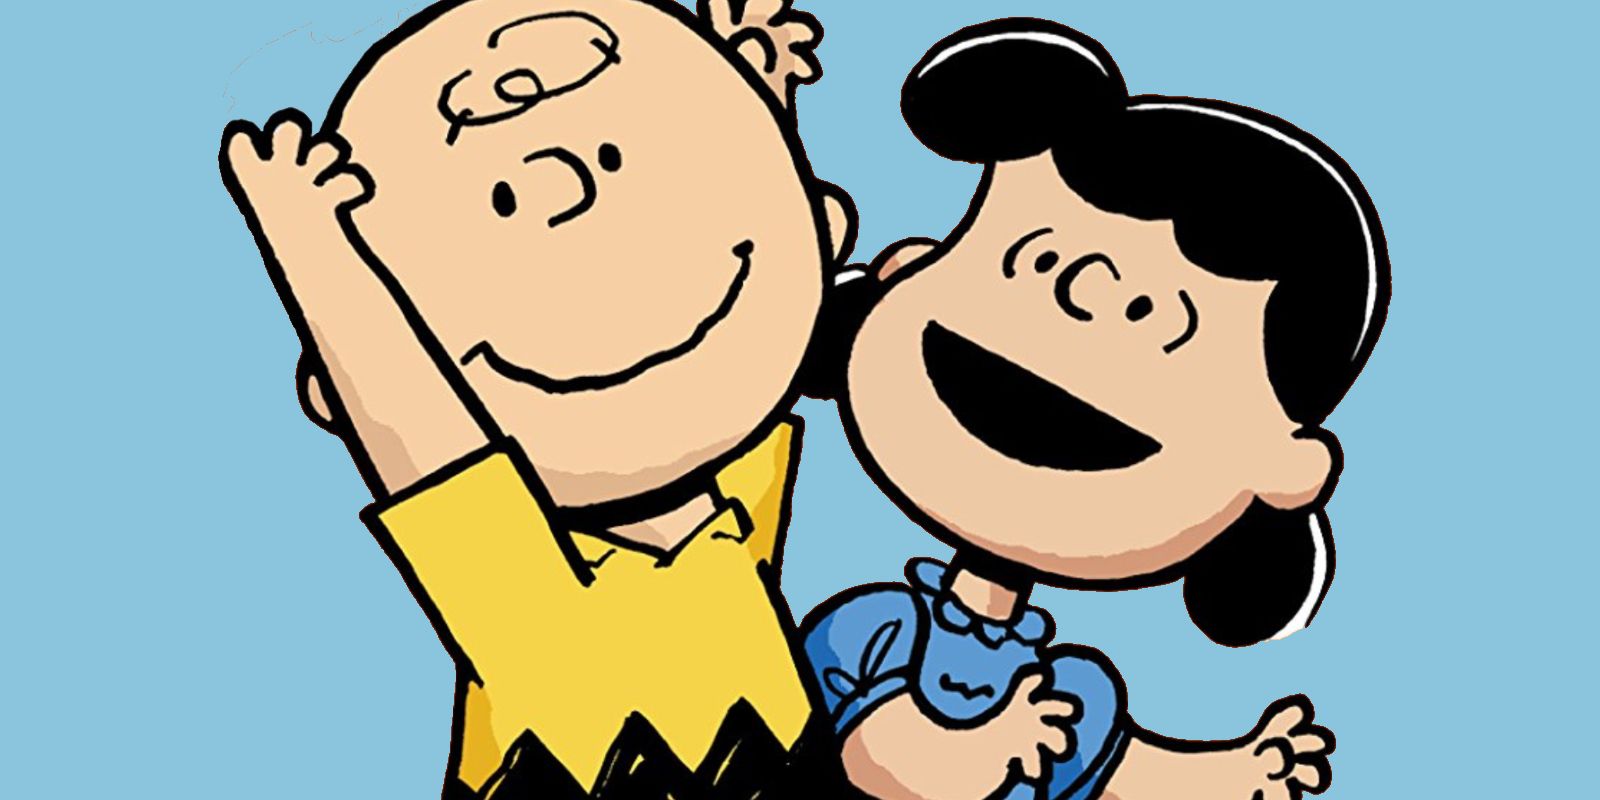 Charlie Brown Specials & New Snoopy Show Episodes Coming To Apple TV+